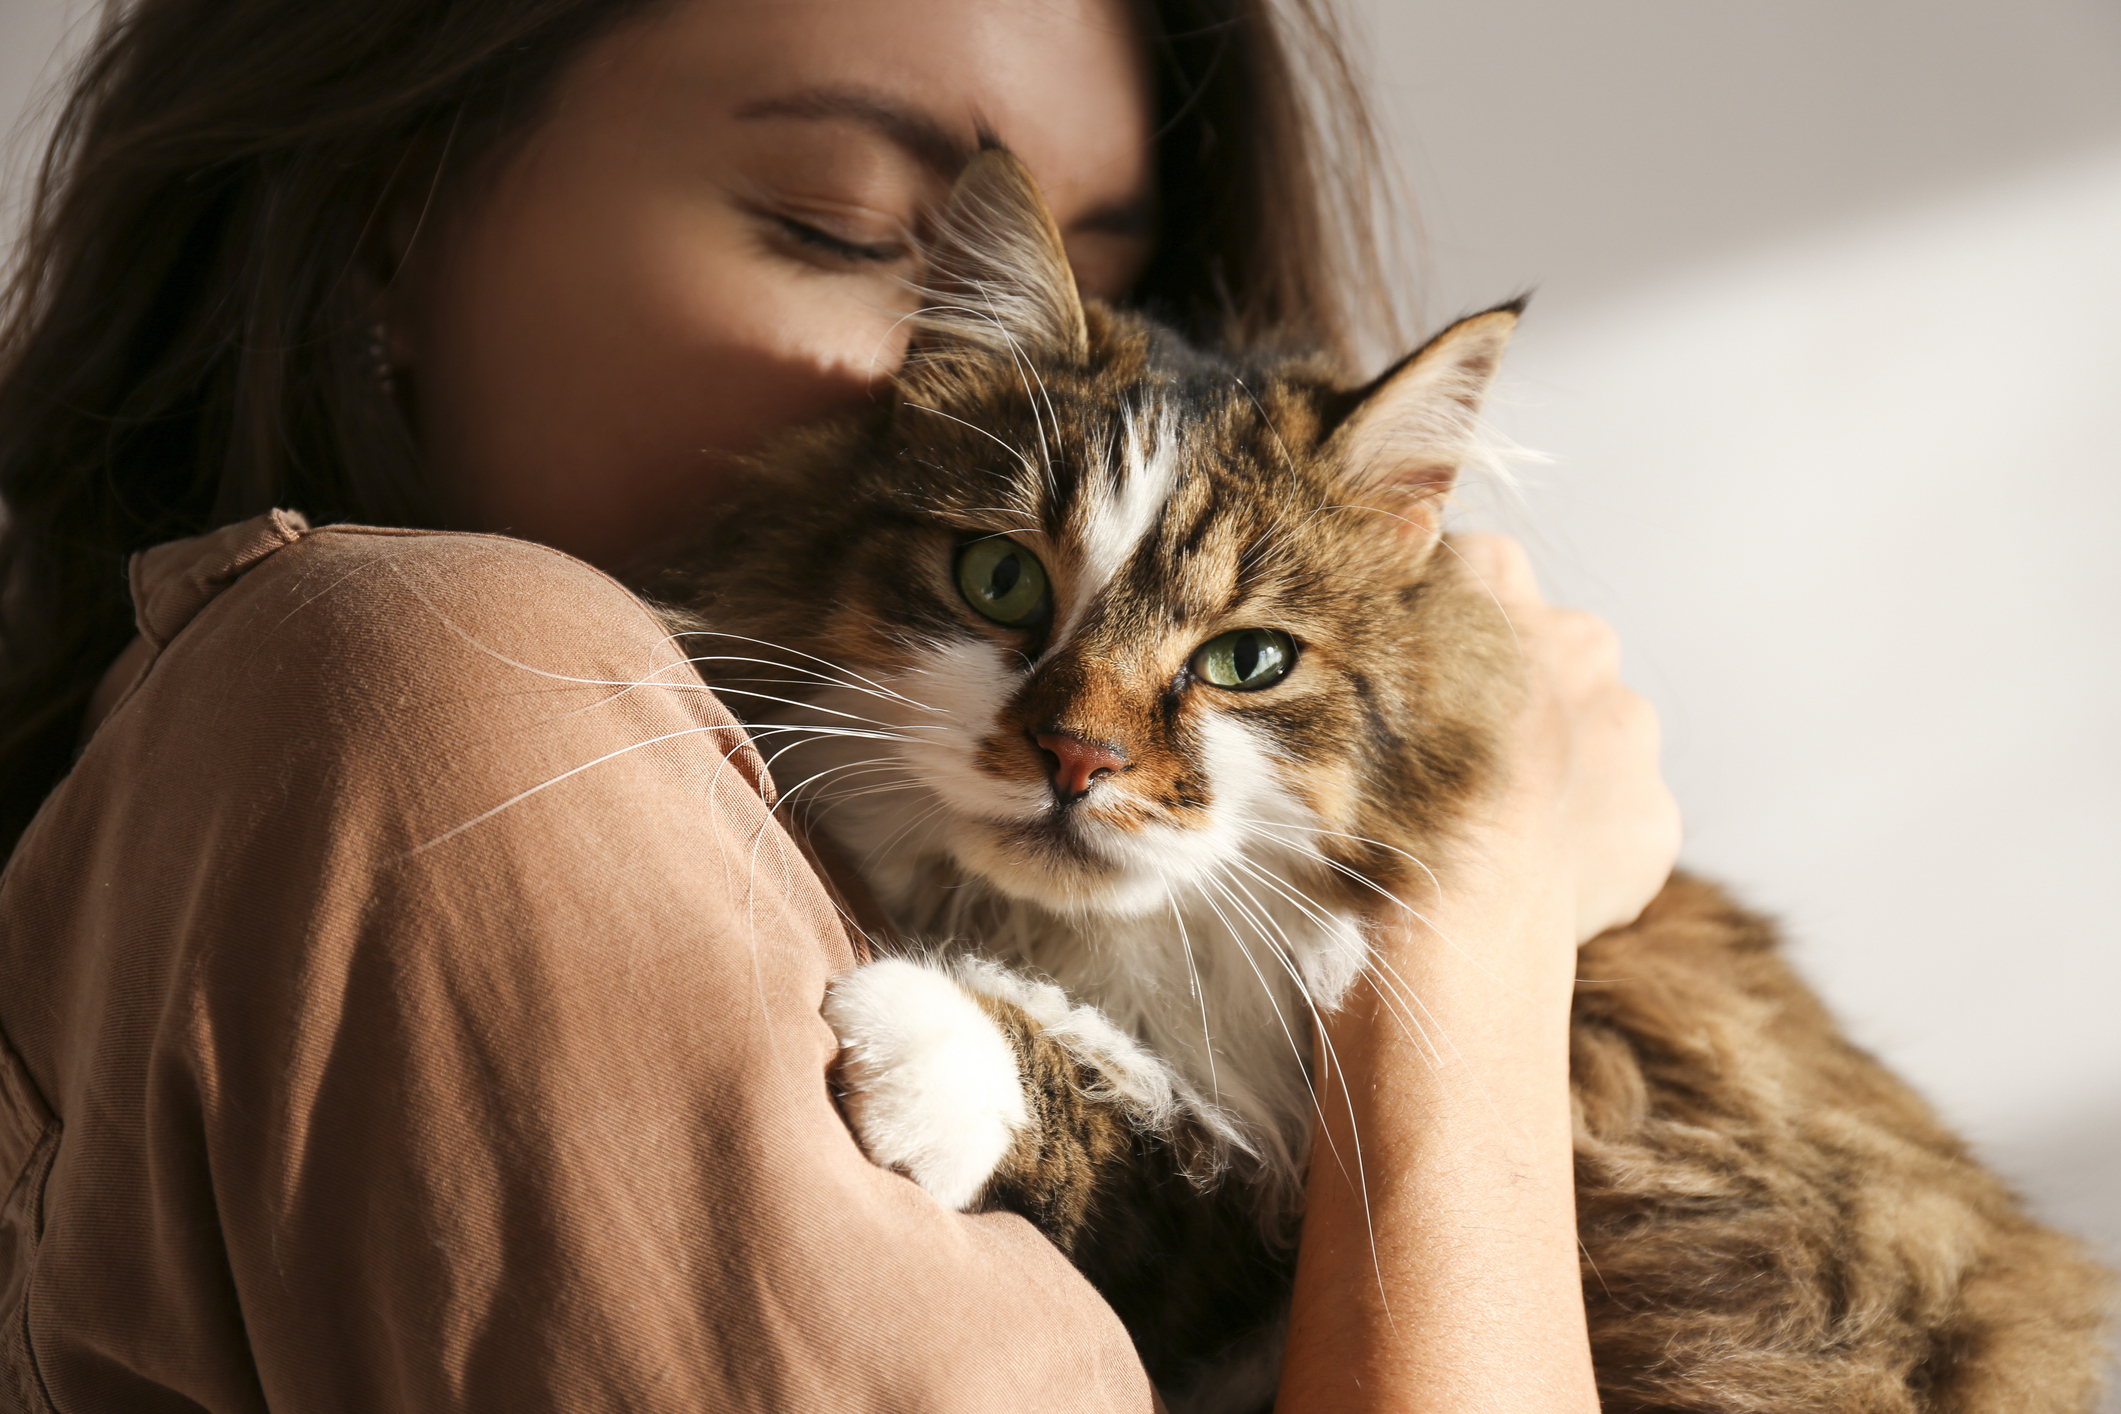 Antibiotics can come with some negative side effects, like diarrhea and a disruption of the delicate balance of bacteria in the gut. Here are easy, science-backed tips to support cats during and after antibiotic treatment.